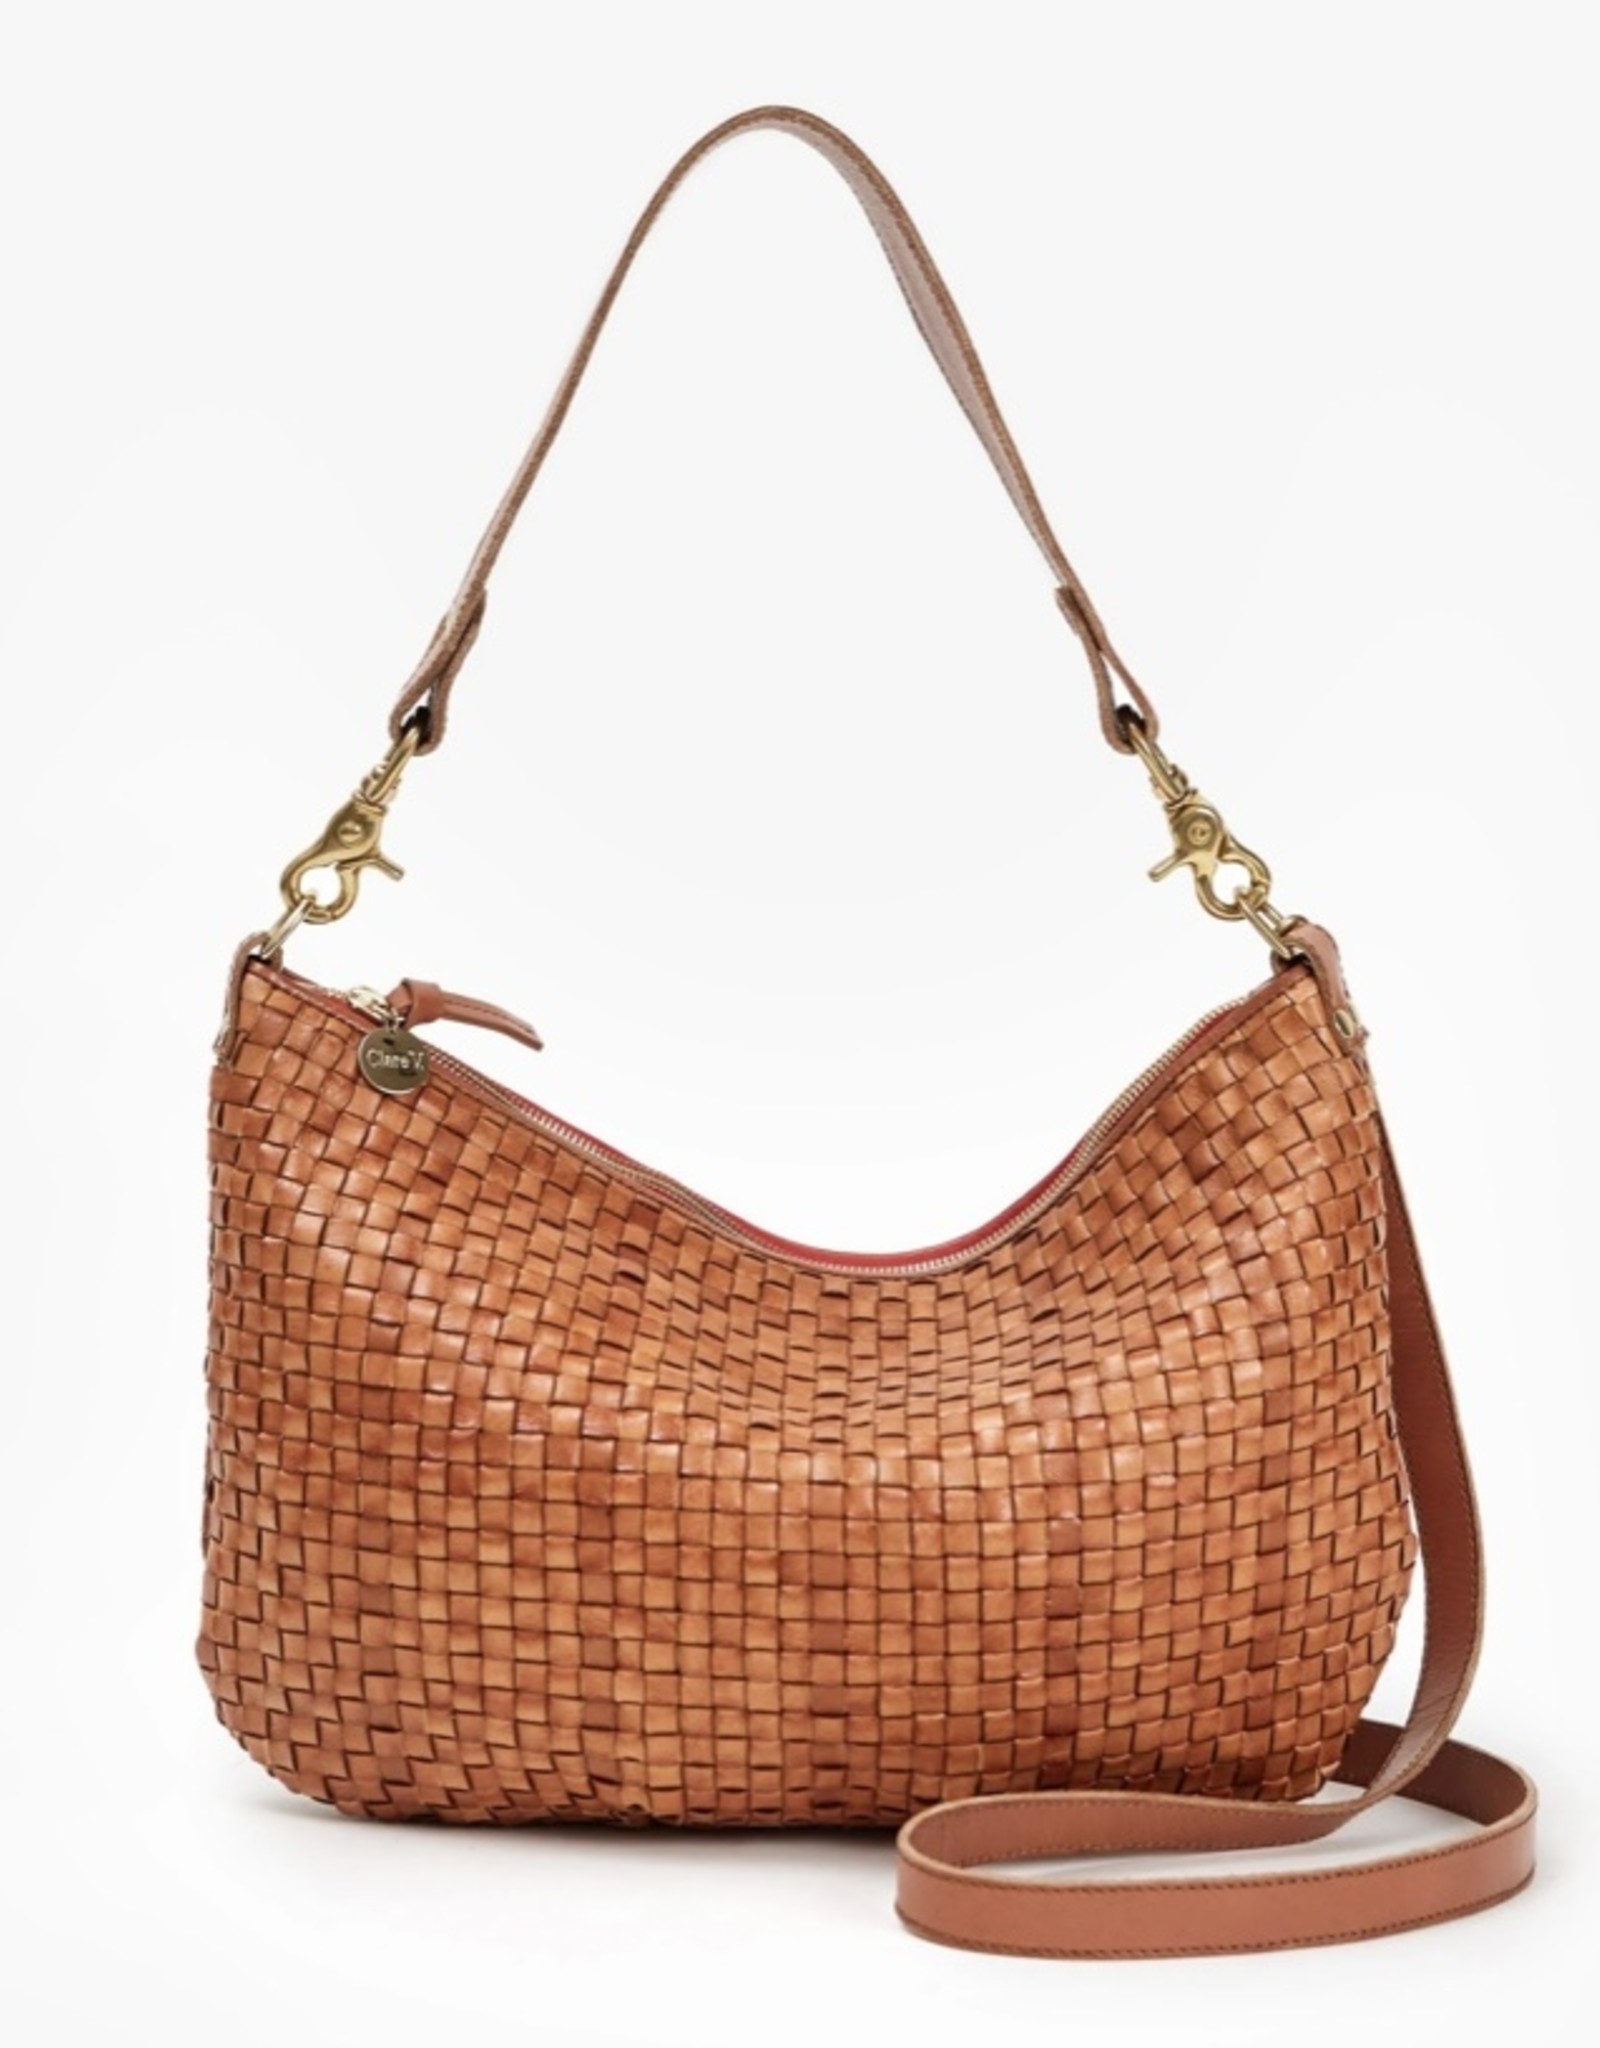 clare v woven leather tote